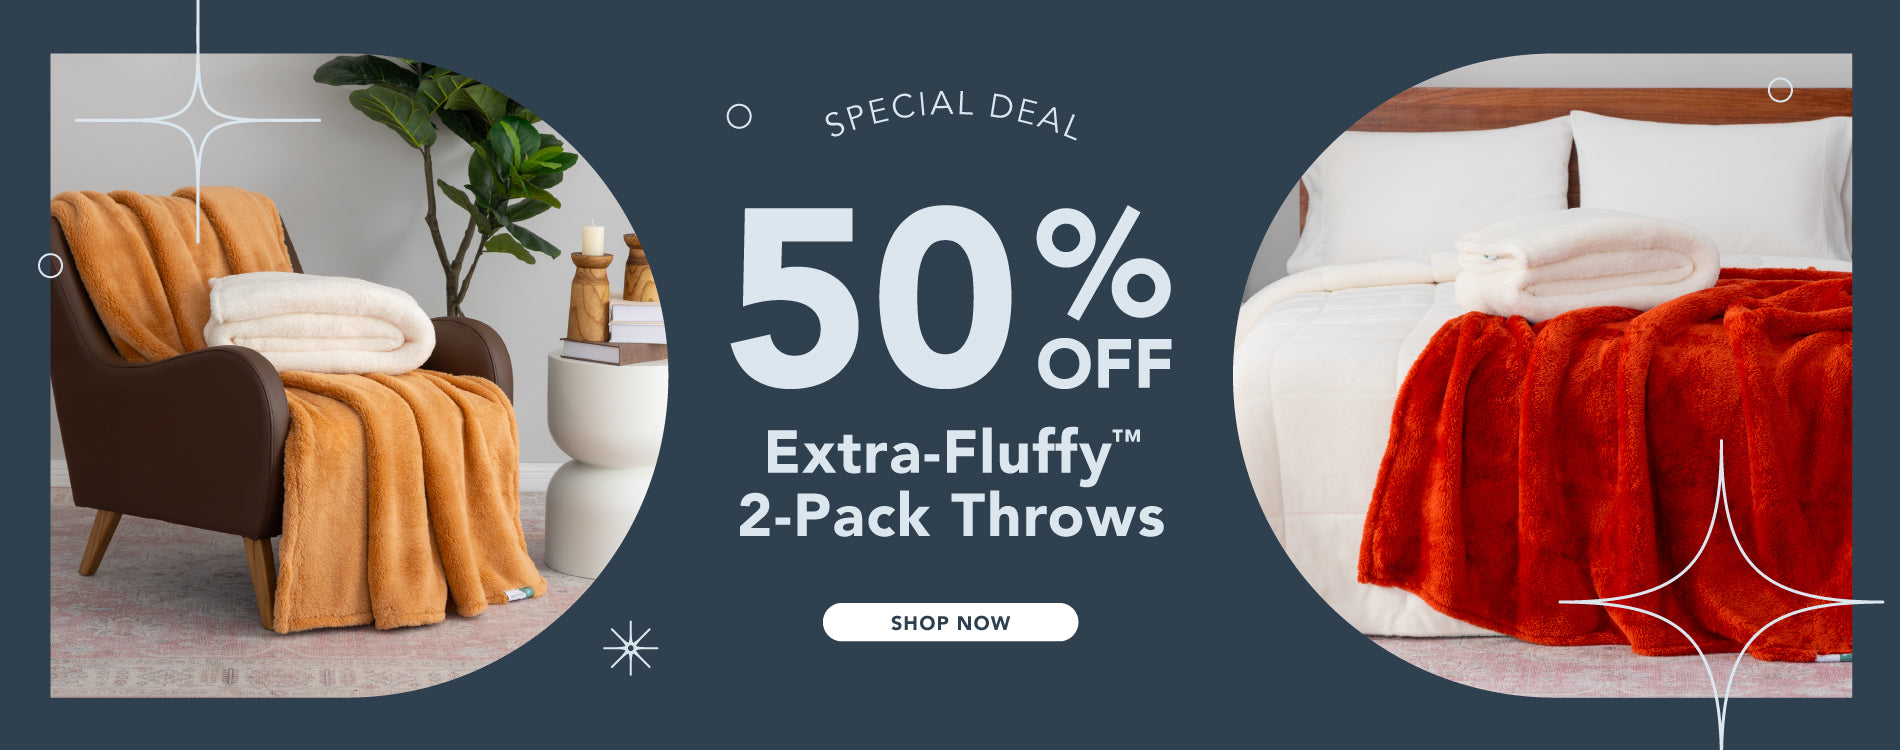 Special deal! Enjoy 50% off our Extra-Fluffy 2-Pack Throws.